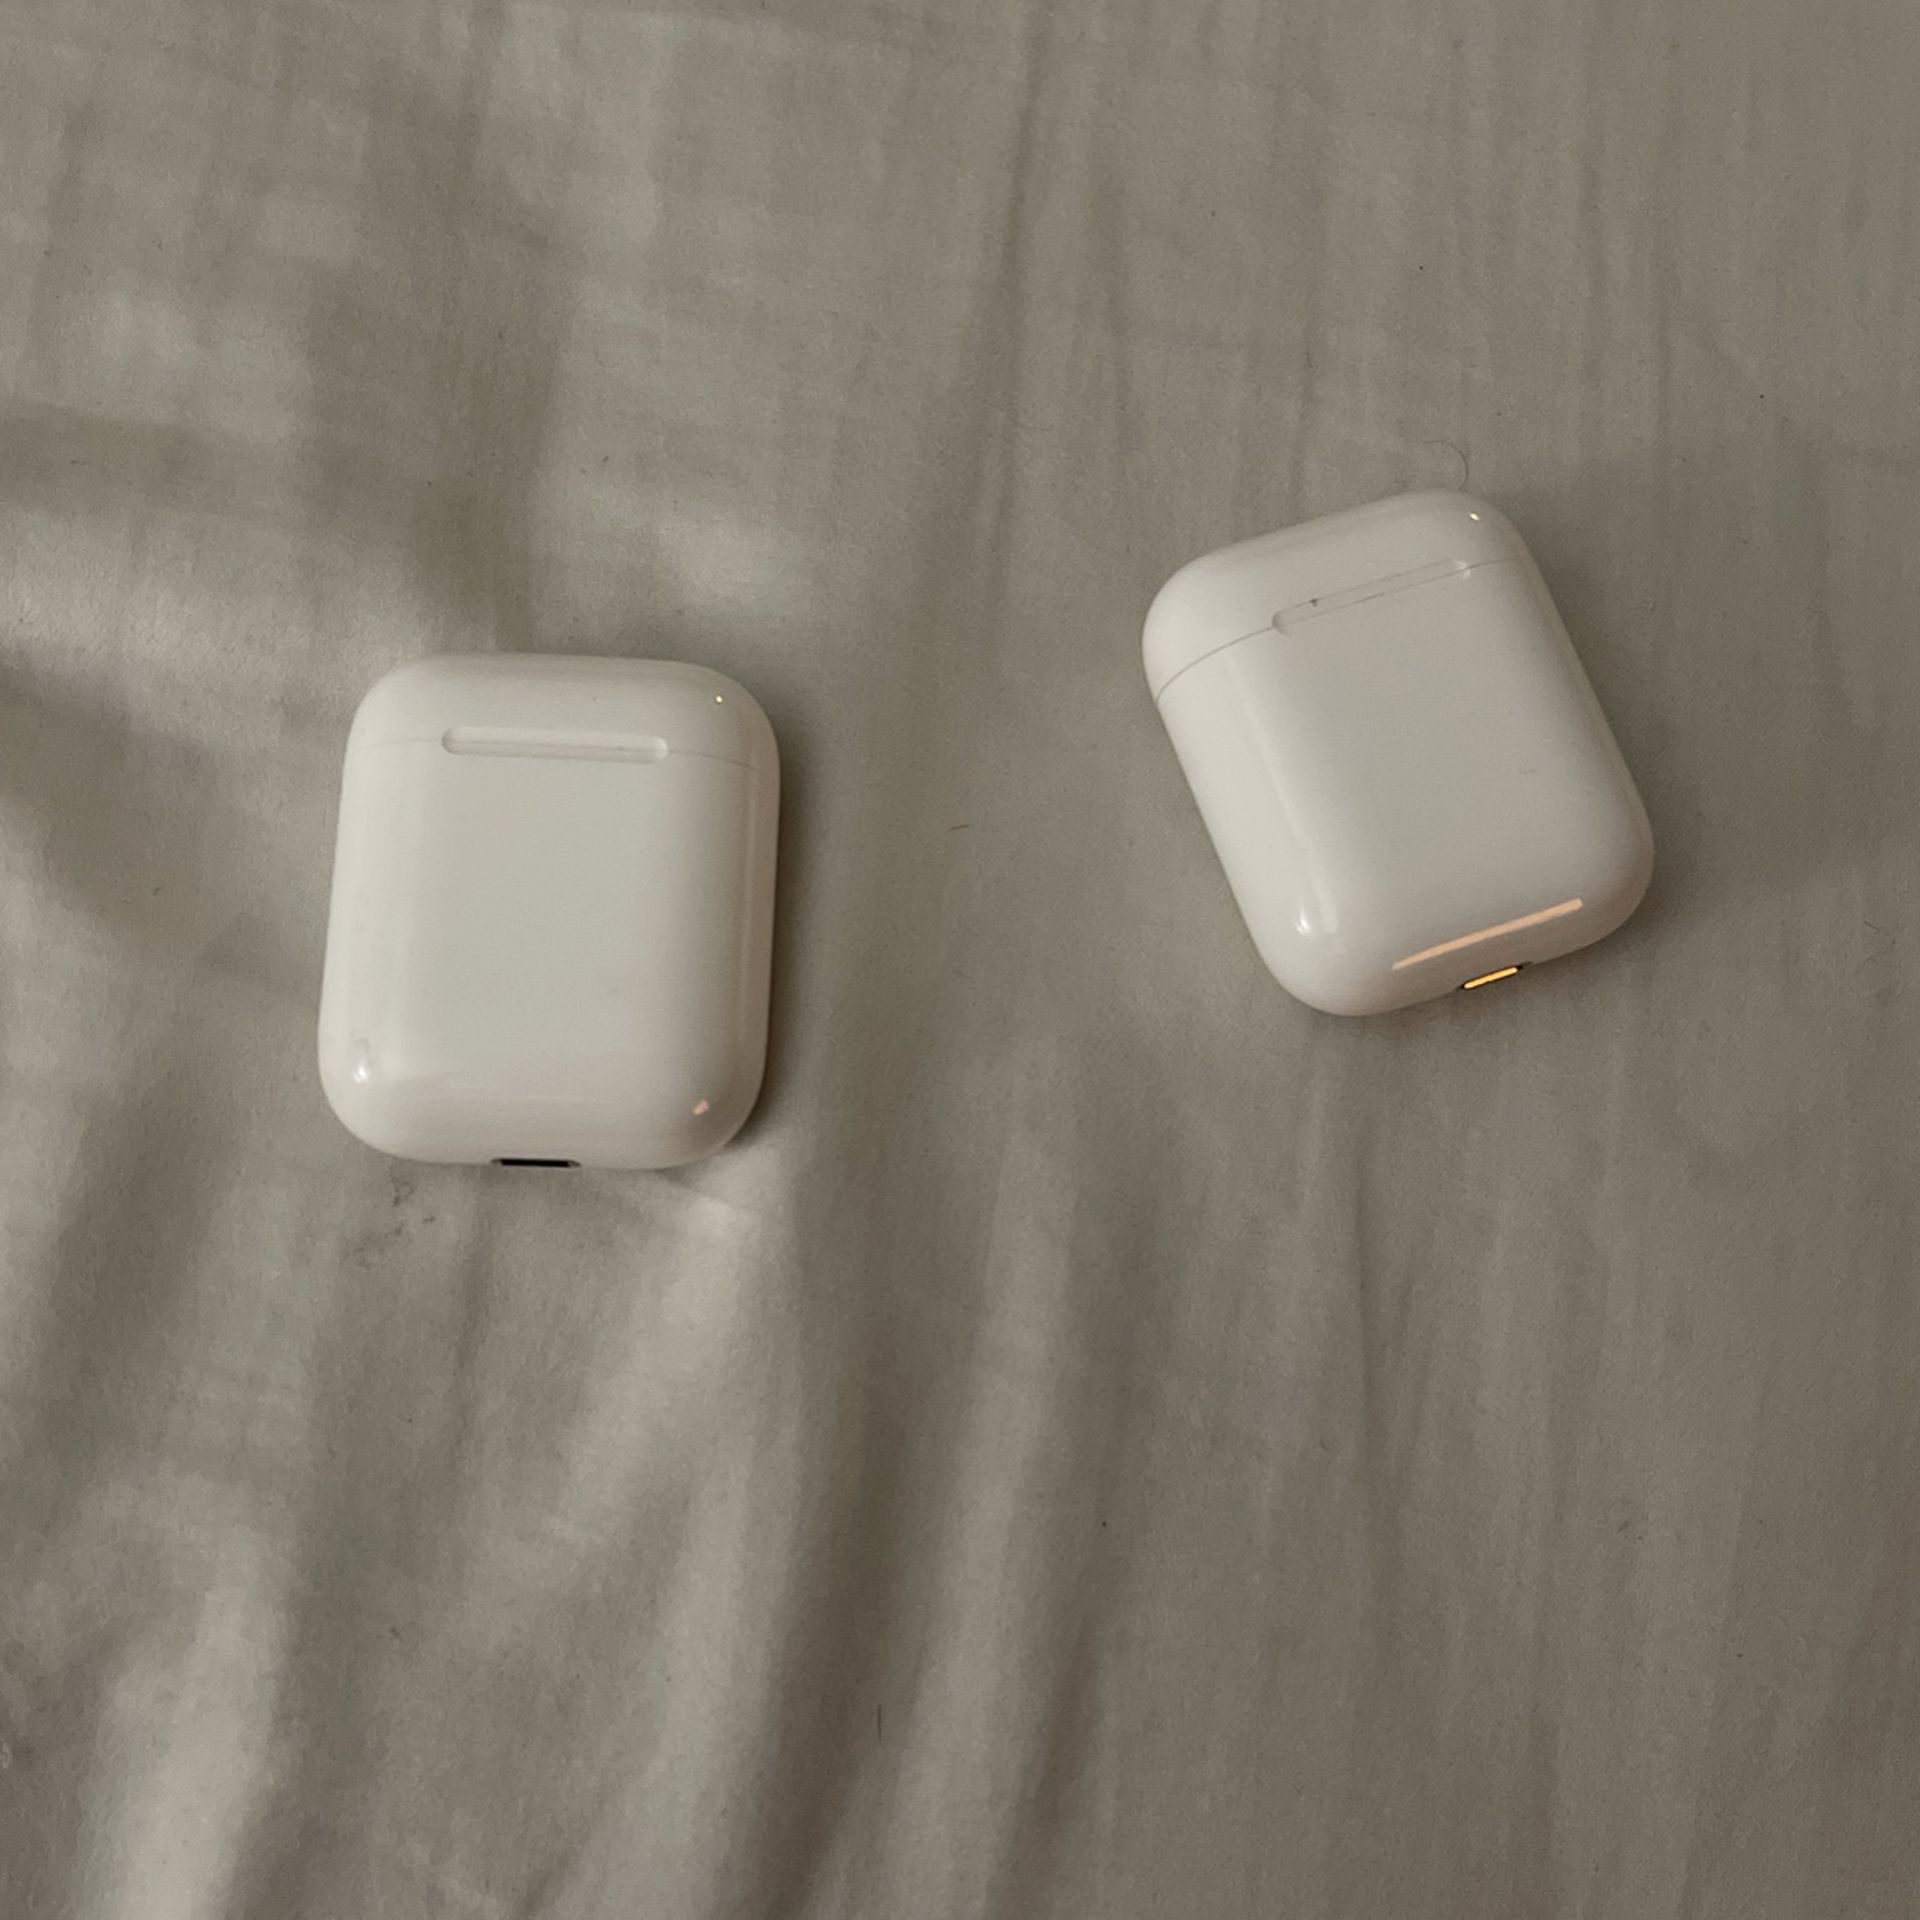 AirPod charging cases (no Pods)